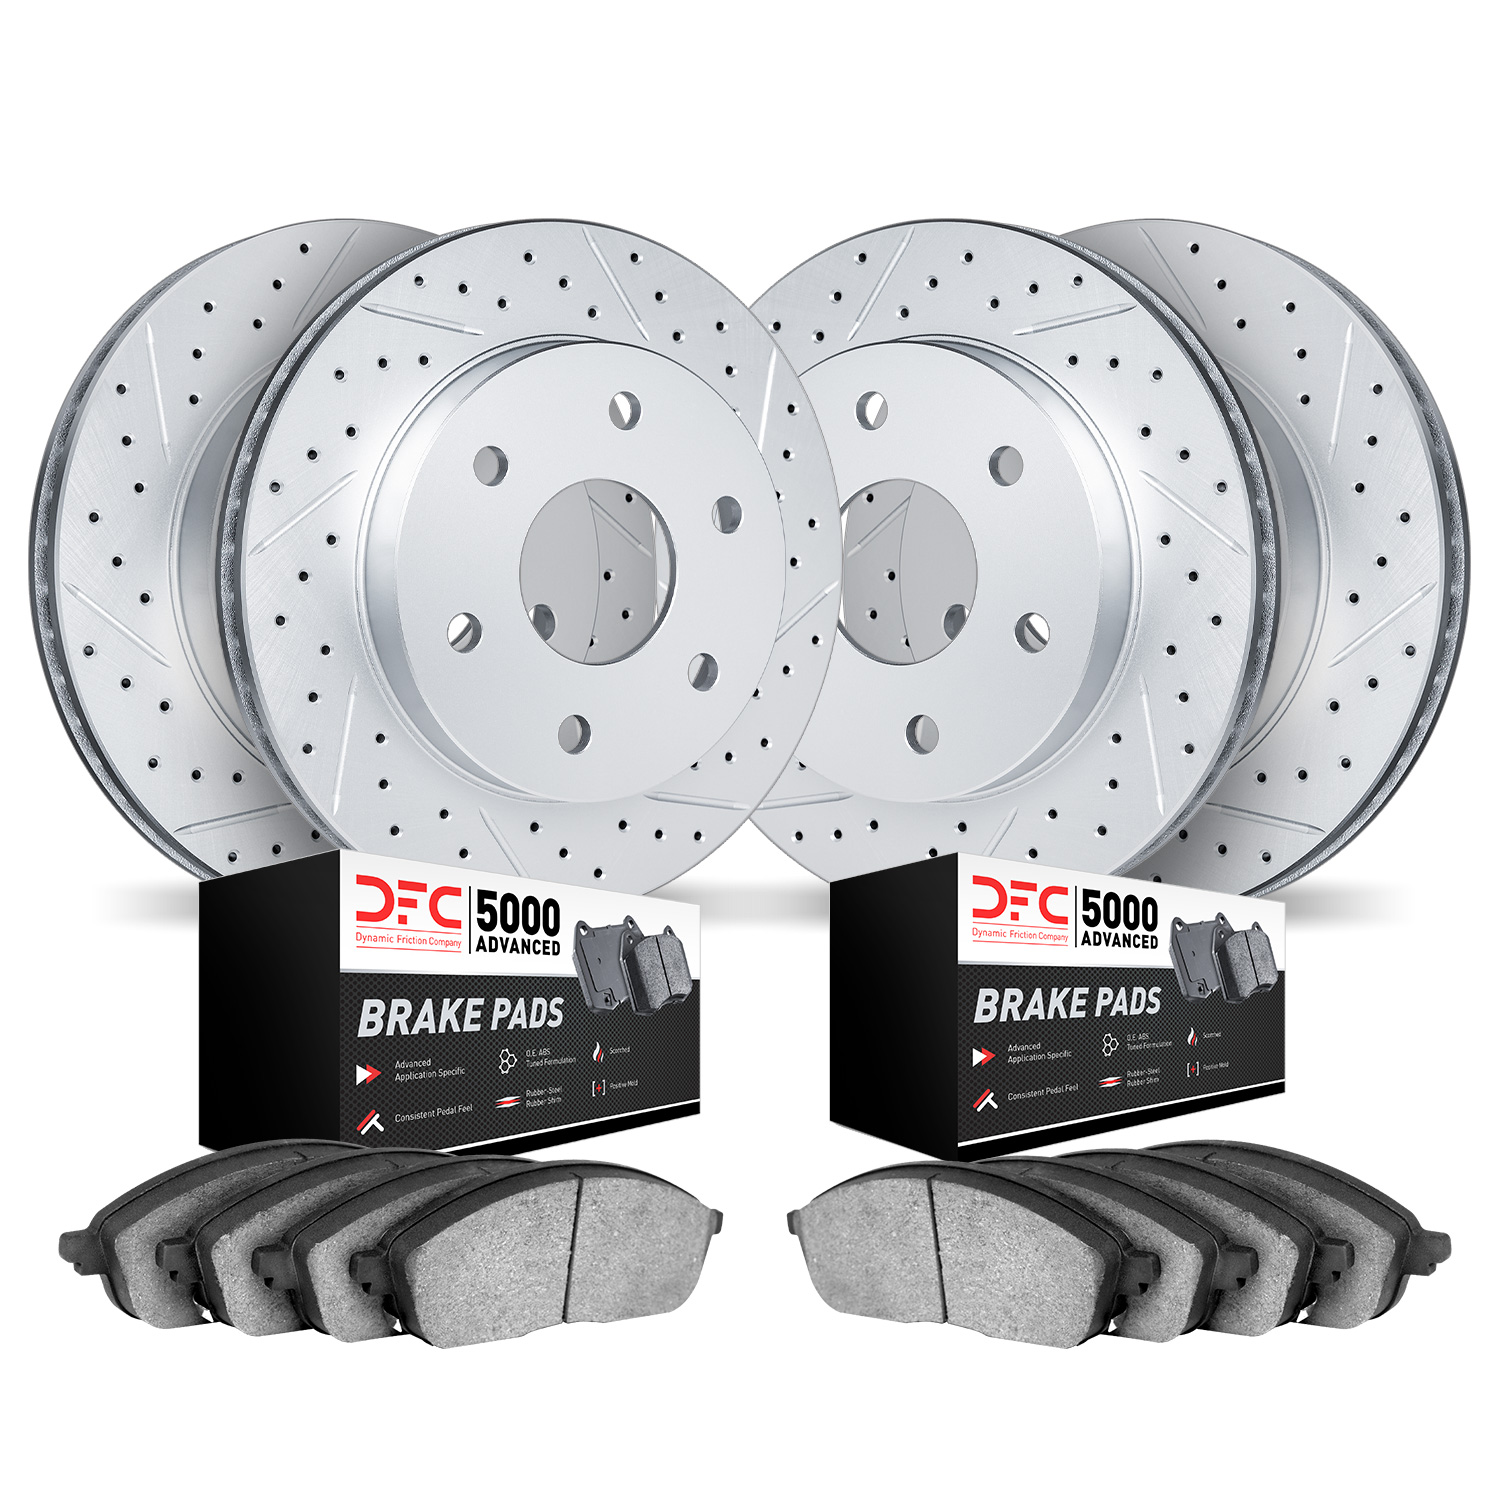 2504-46040 Geoperformance Drilled/Slotted Rotors w/5000 Advanced Brake Pads Kit, 2010-2016 GM, Position: Front and Rear